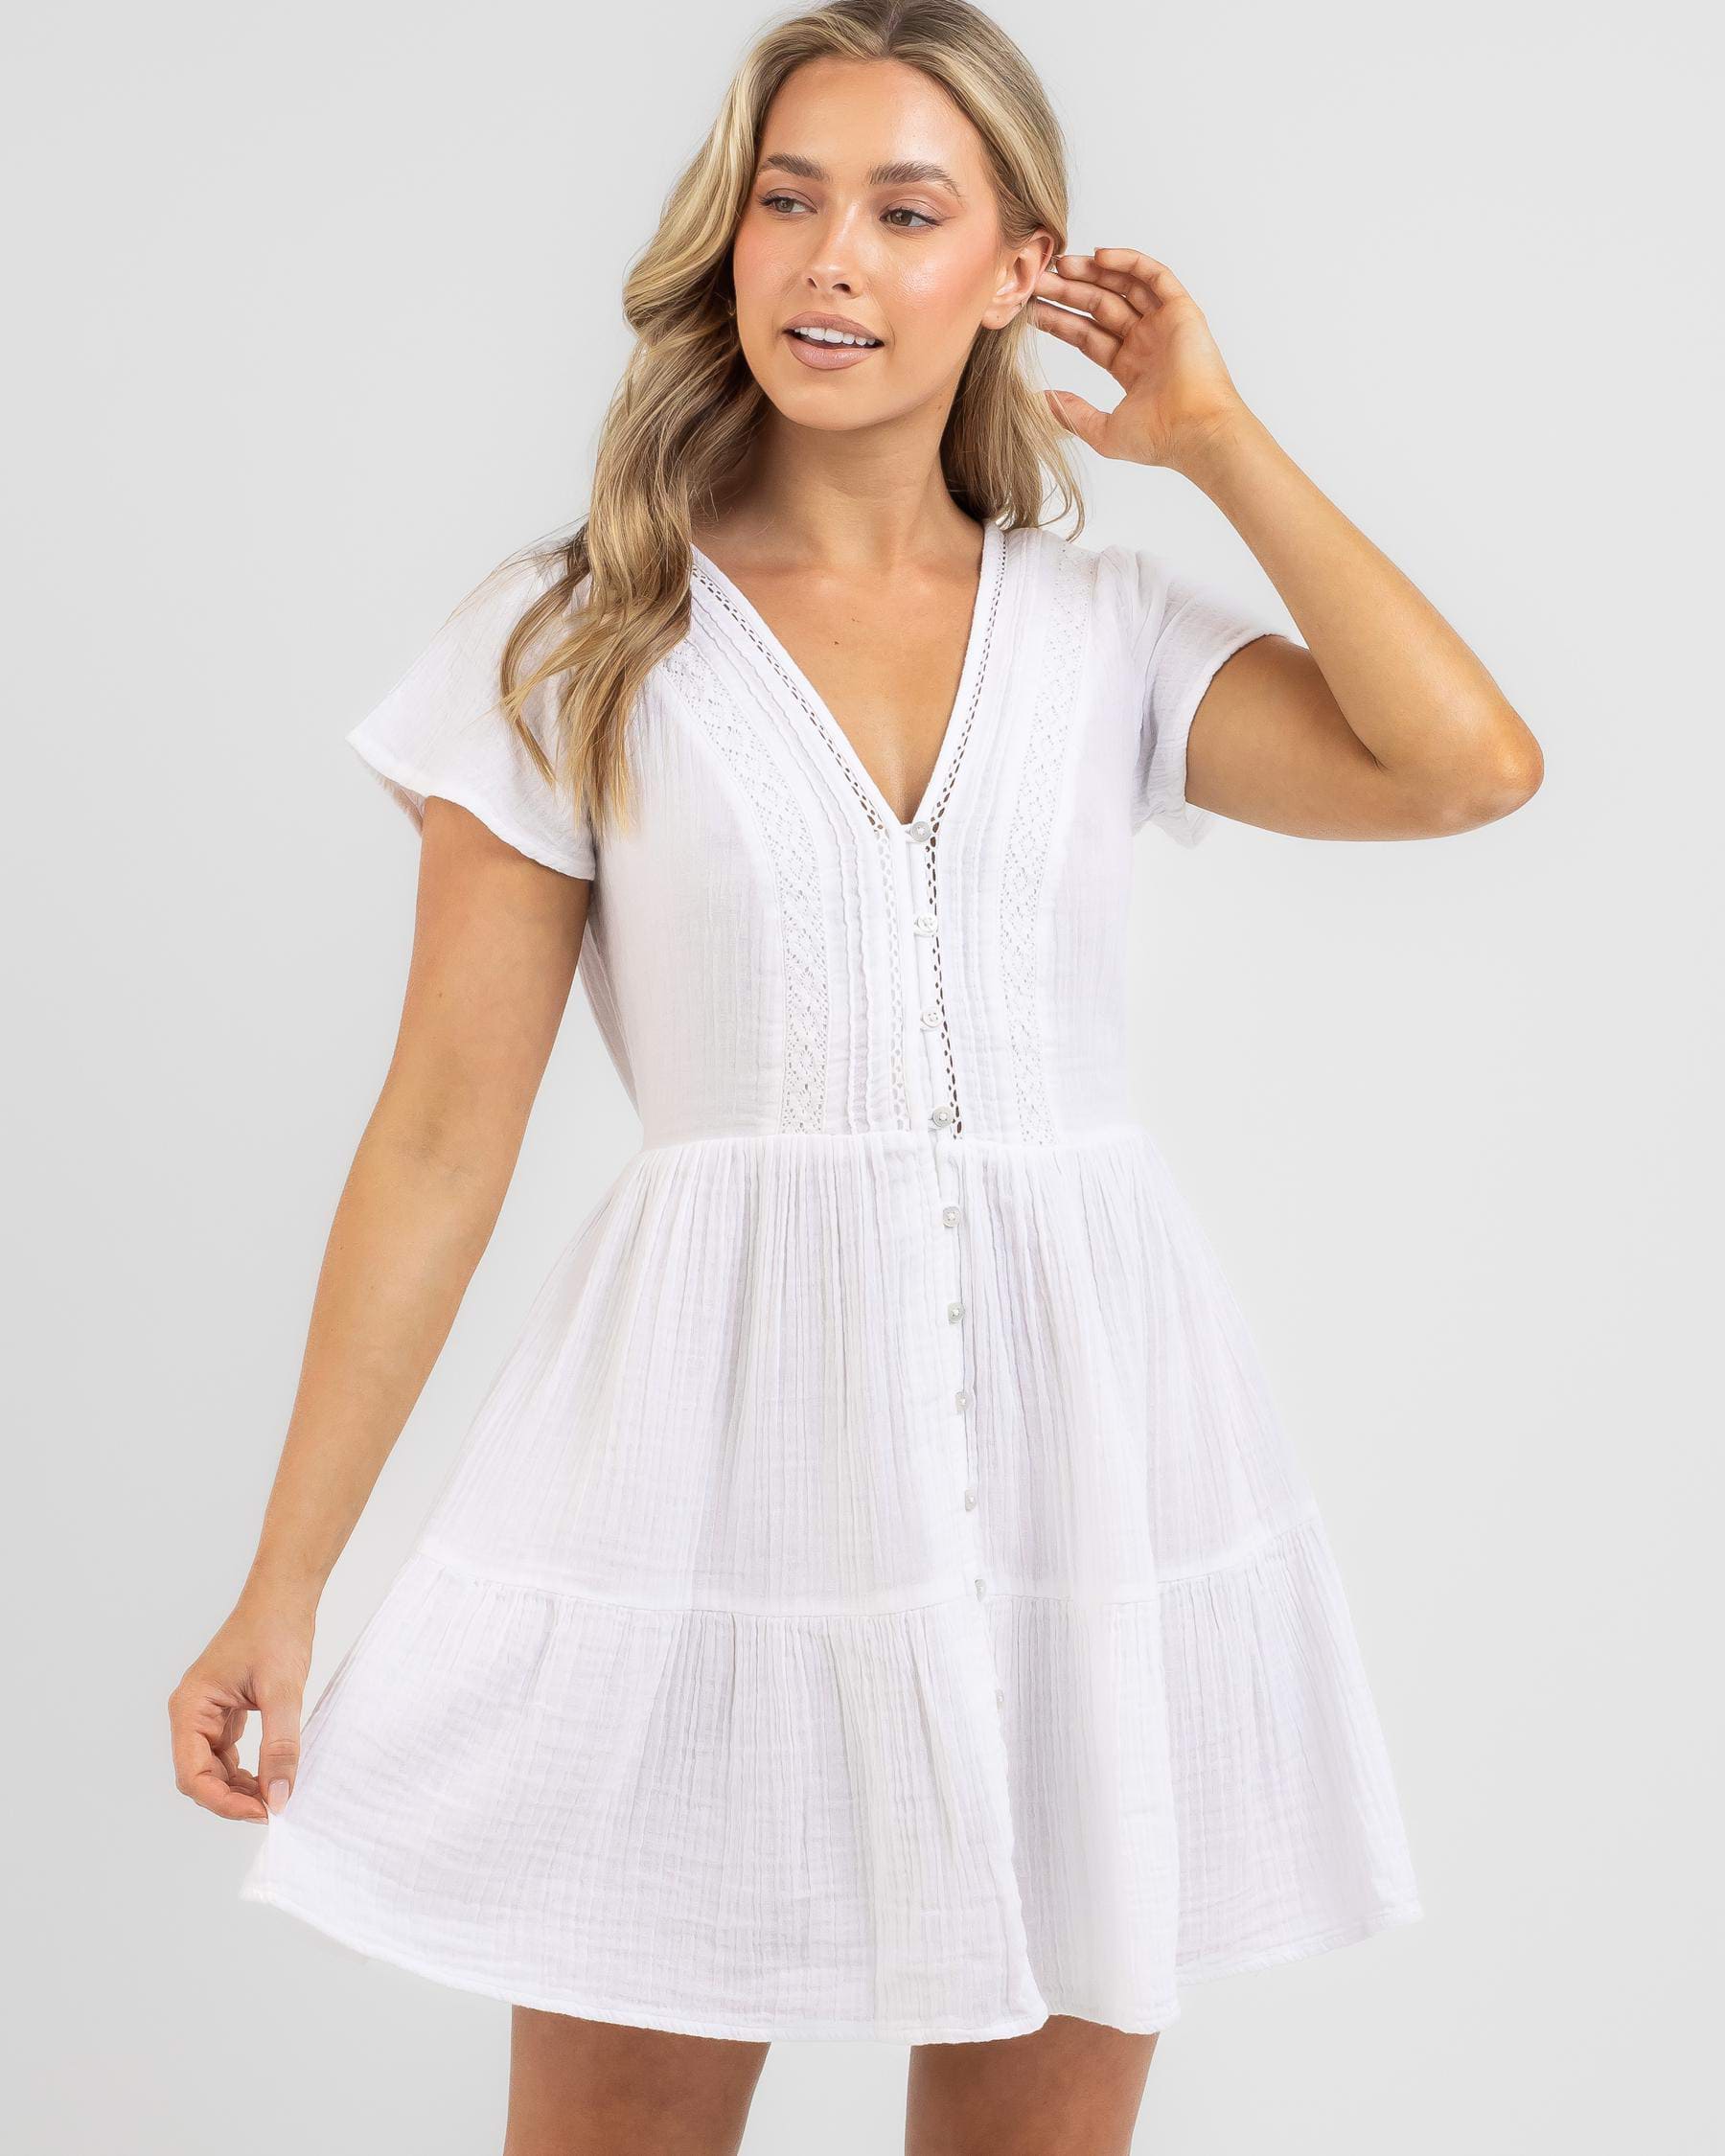 Rip Curl Summer Breeze Dress In White - Fast Shipping & Easy Returns ...